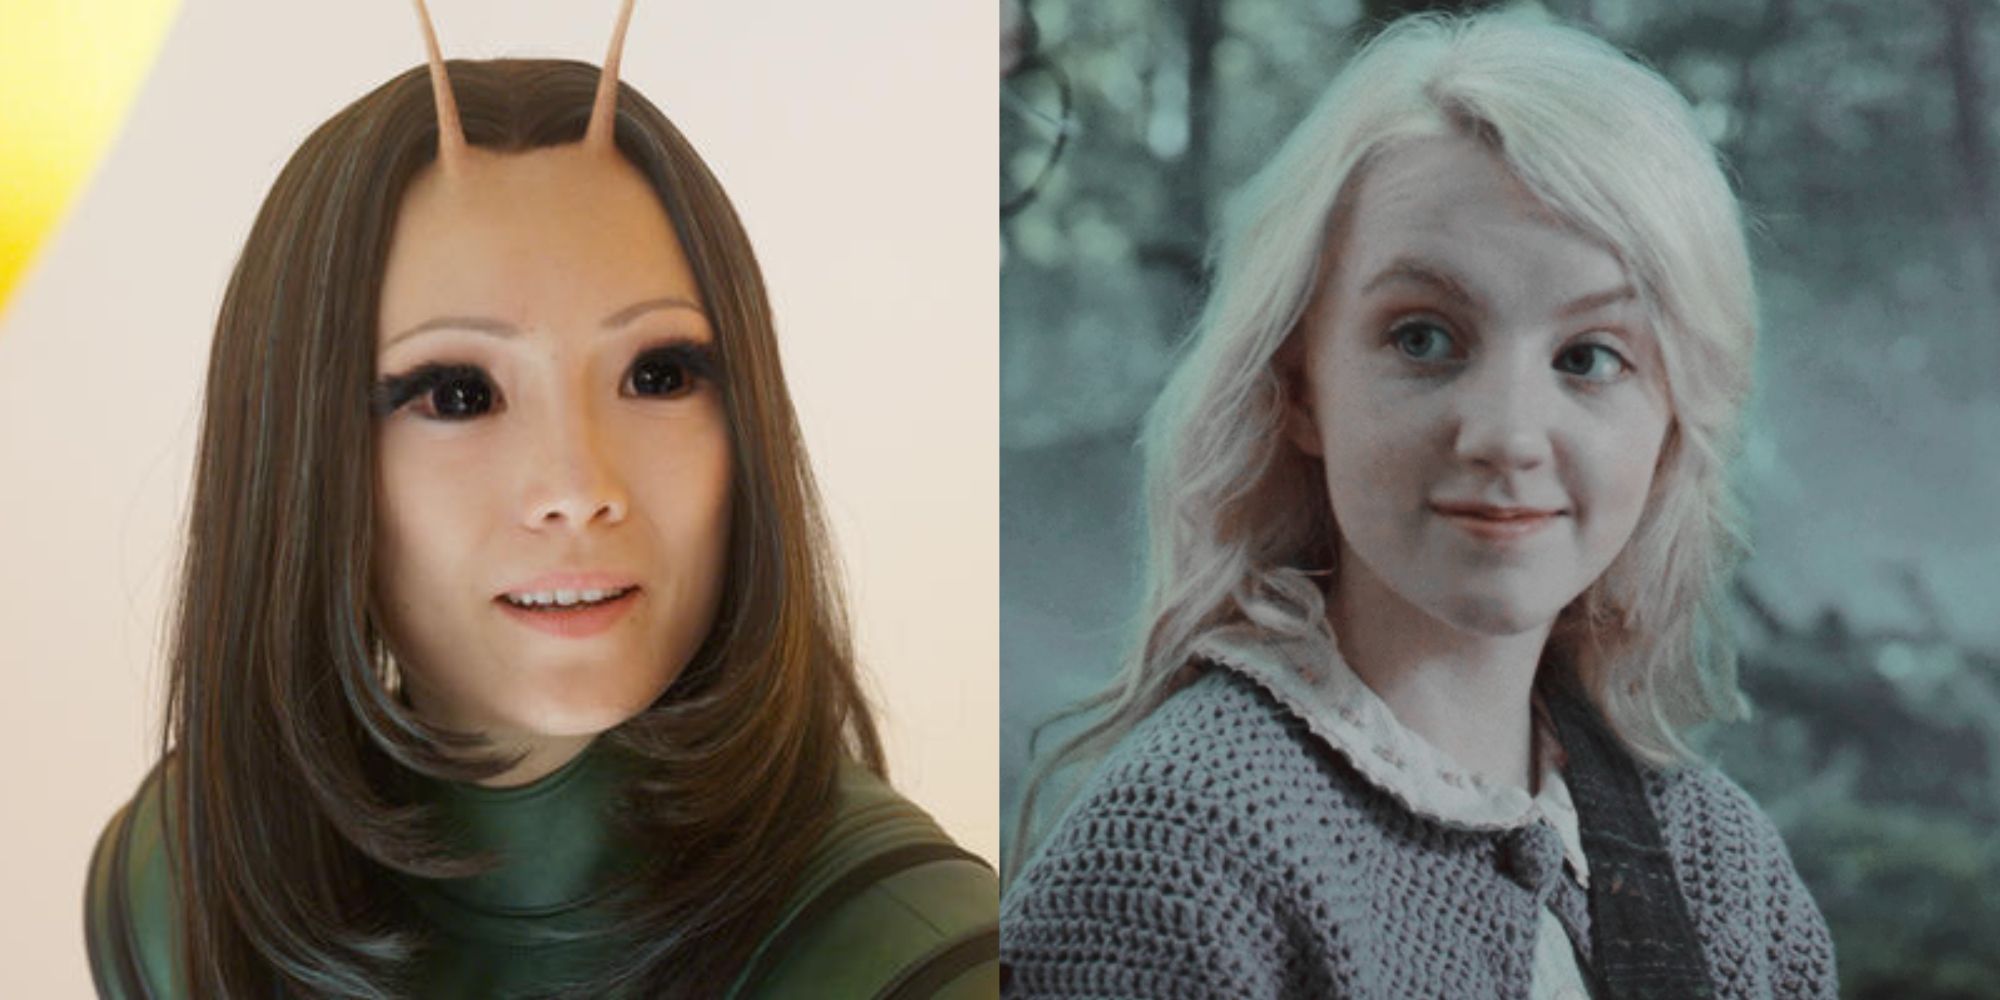 Split images of Mantis smiling in Guardians of the Galaxy 2 and Luna Lovegood smiling in Harry Potter 5